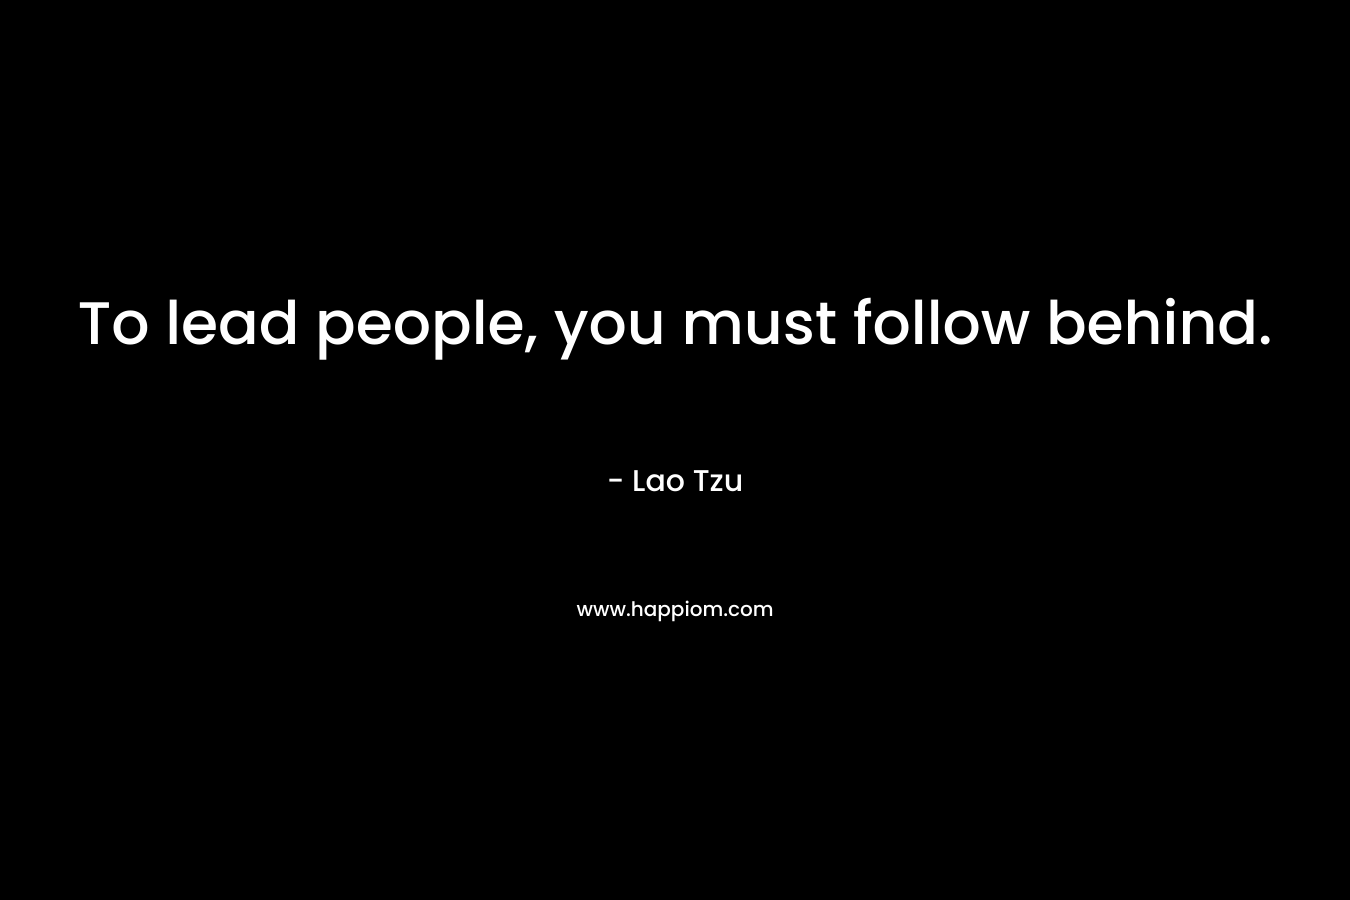 To lead people, you must follow behind. – Lao Tzu